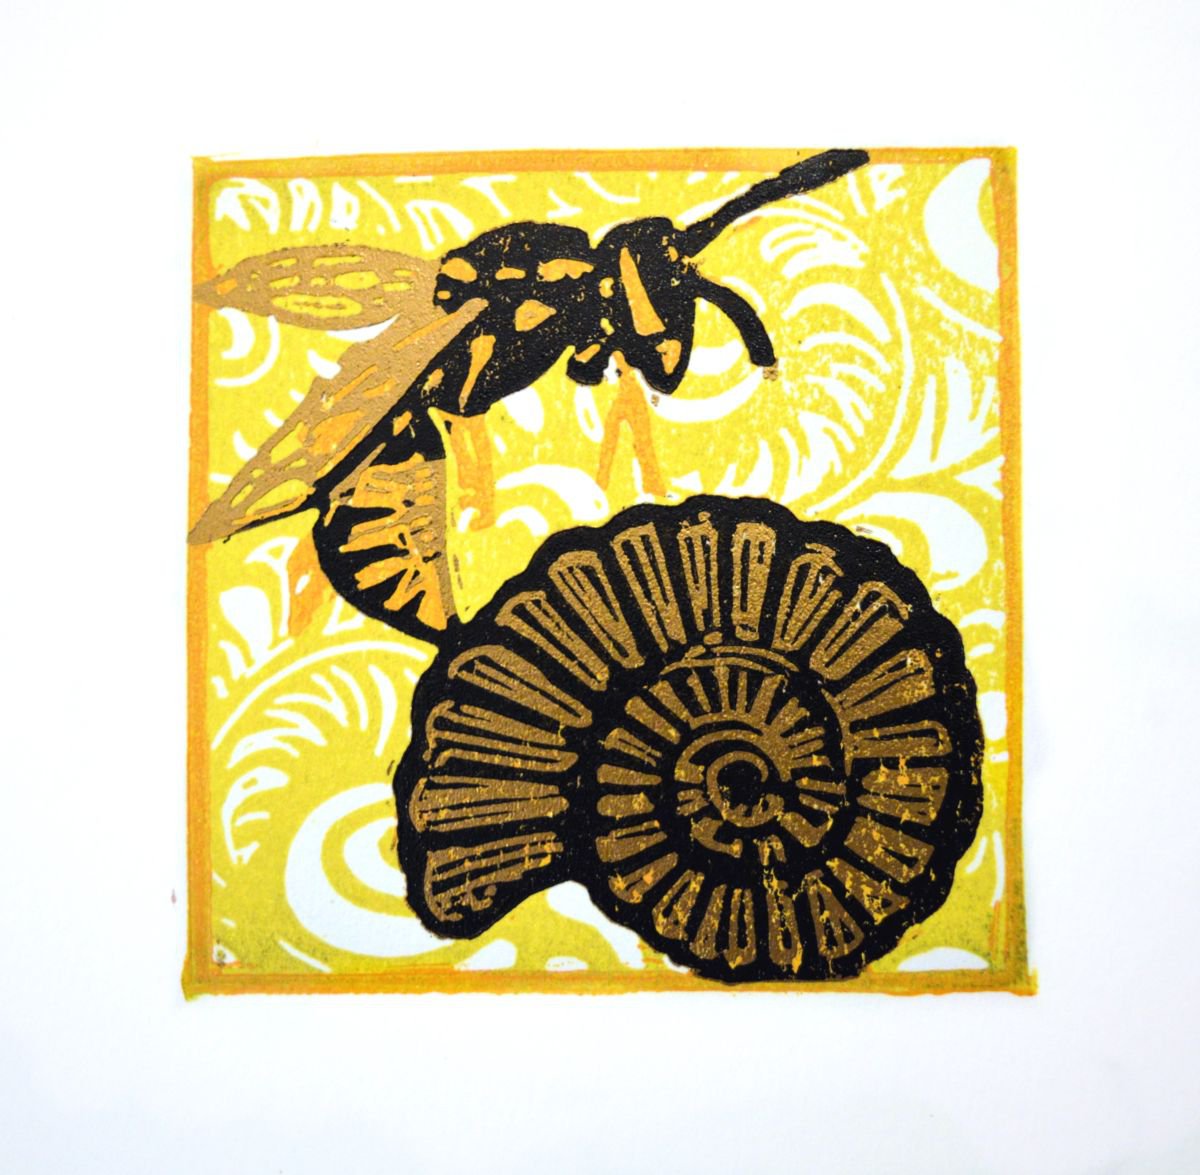 The wasp and the ammonite by Ieuan Edwards